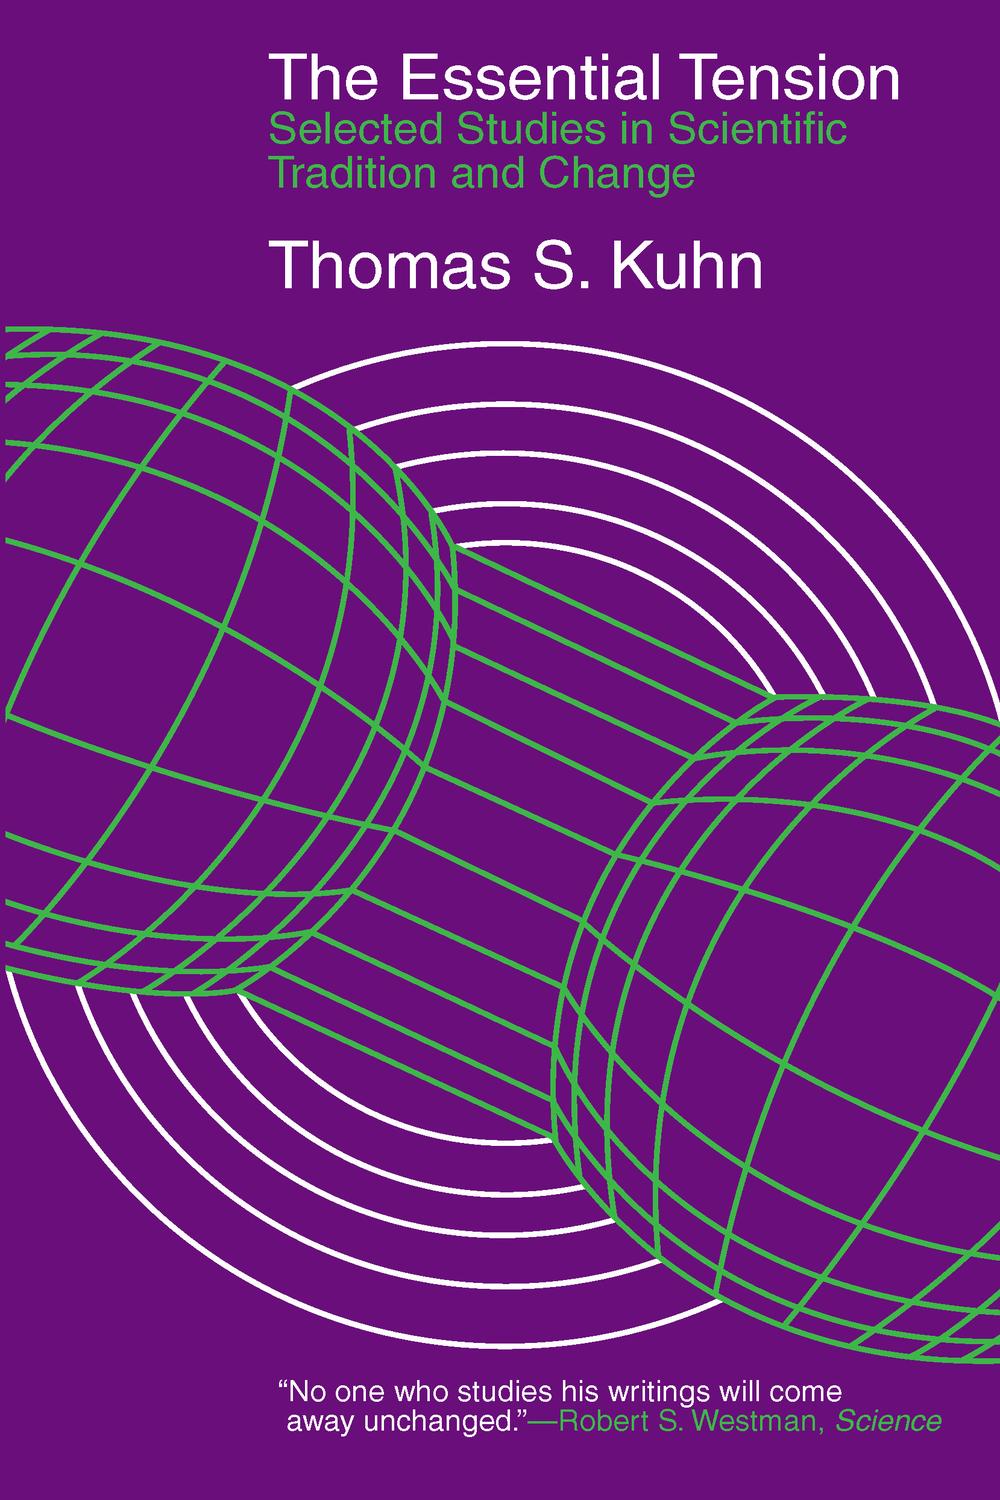 The Essential Tension - Thomas S. Kuhn